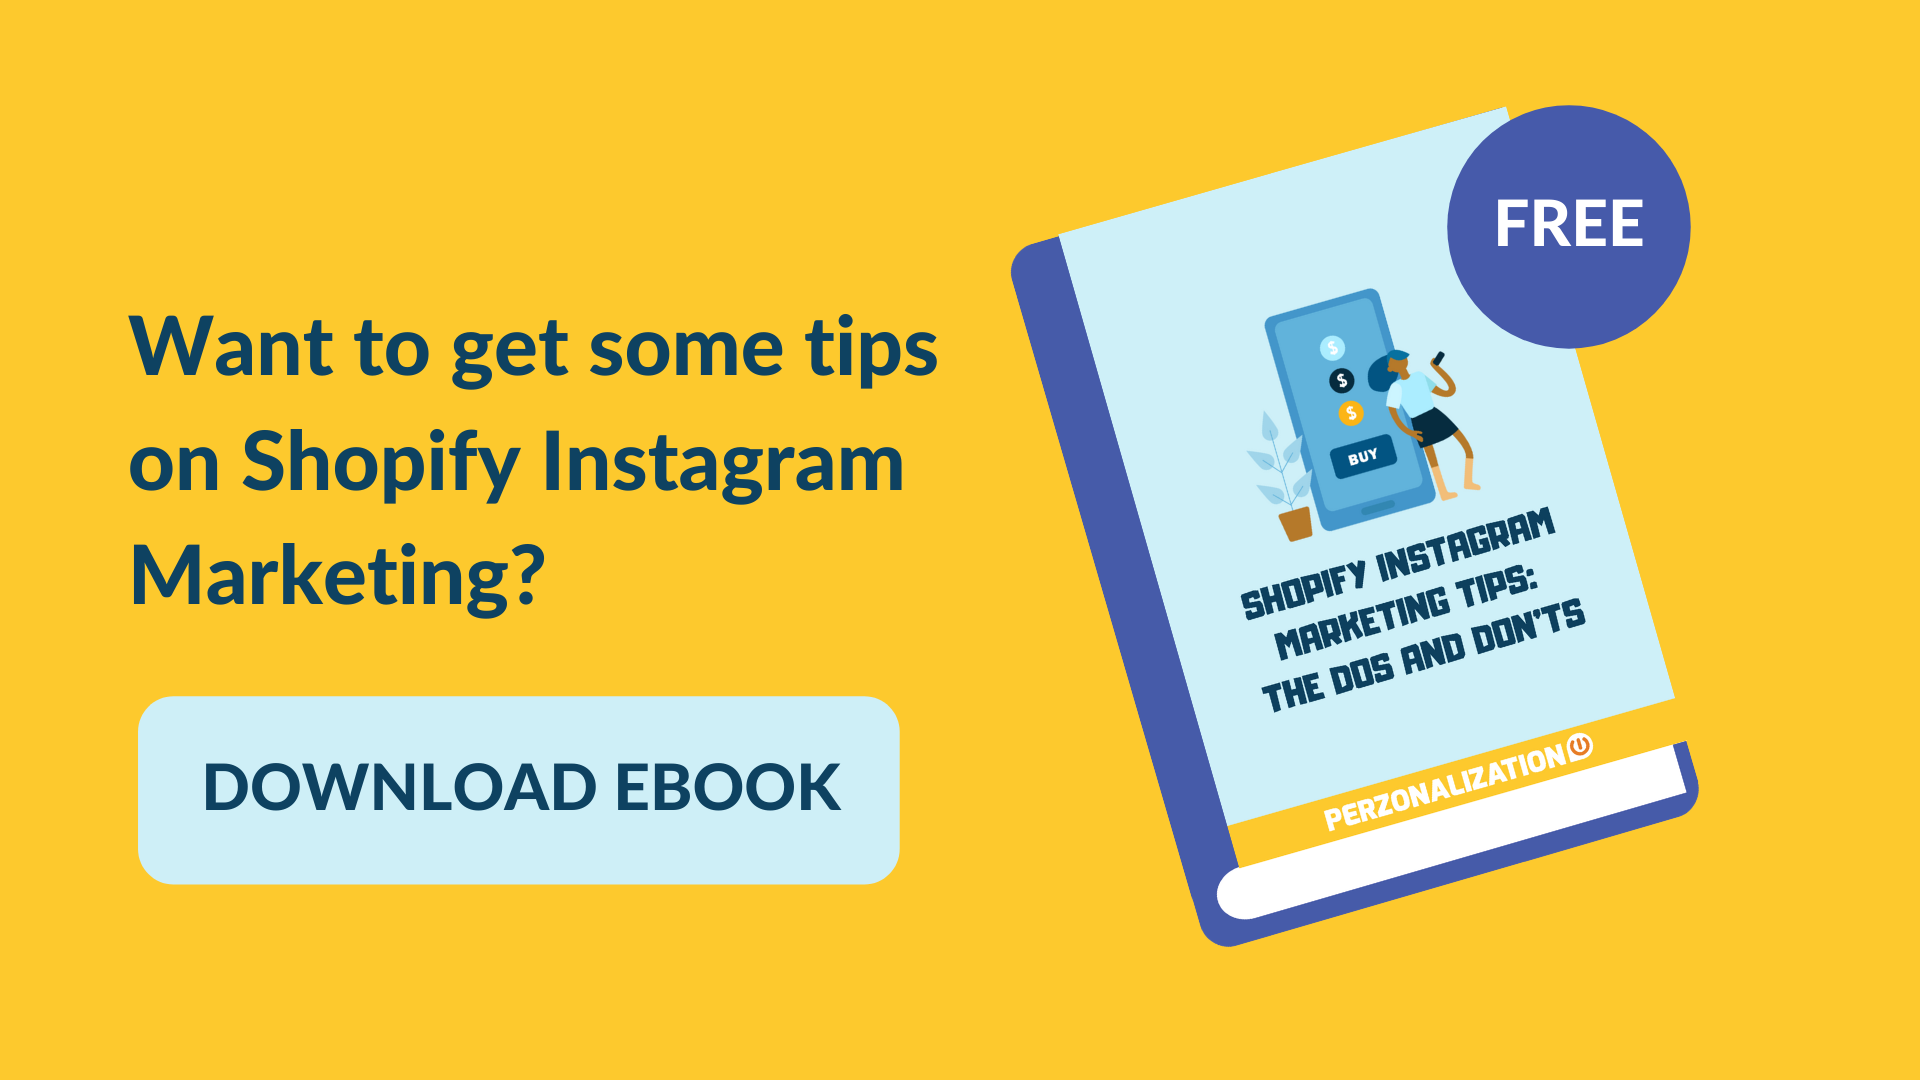 Are you a Shopify merchant? This free ebook lists Shopify Instagram marketing tips that you may find handy for your eCommerce business.